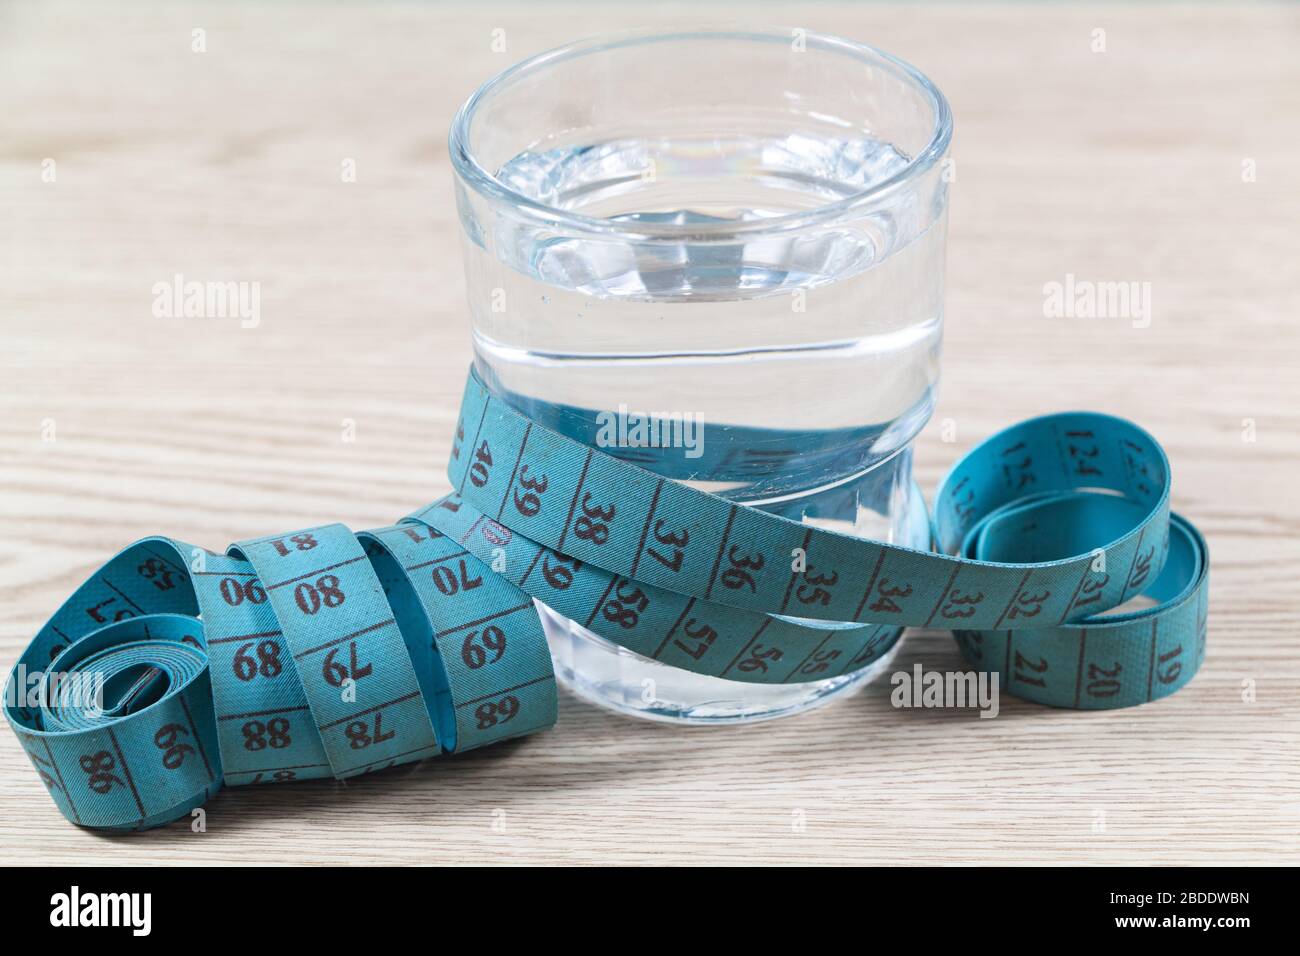 https://c8.alamy.com/comp/2BDDWBN/sewing-meter-around-a-glass-of-water-as-concept-for-diet-2BDDWBN.jpg